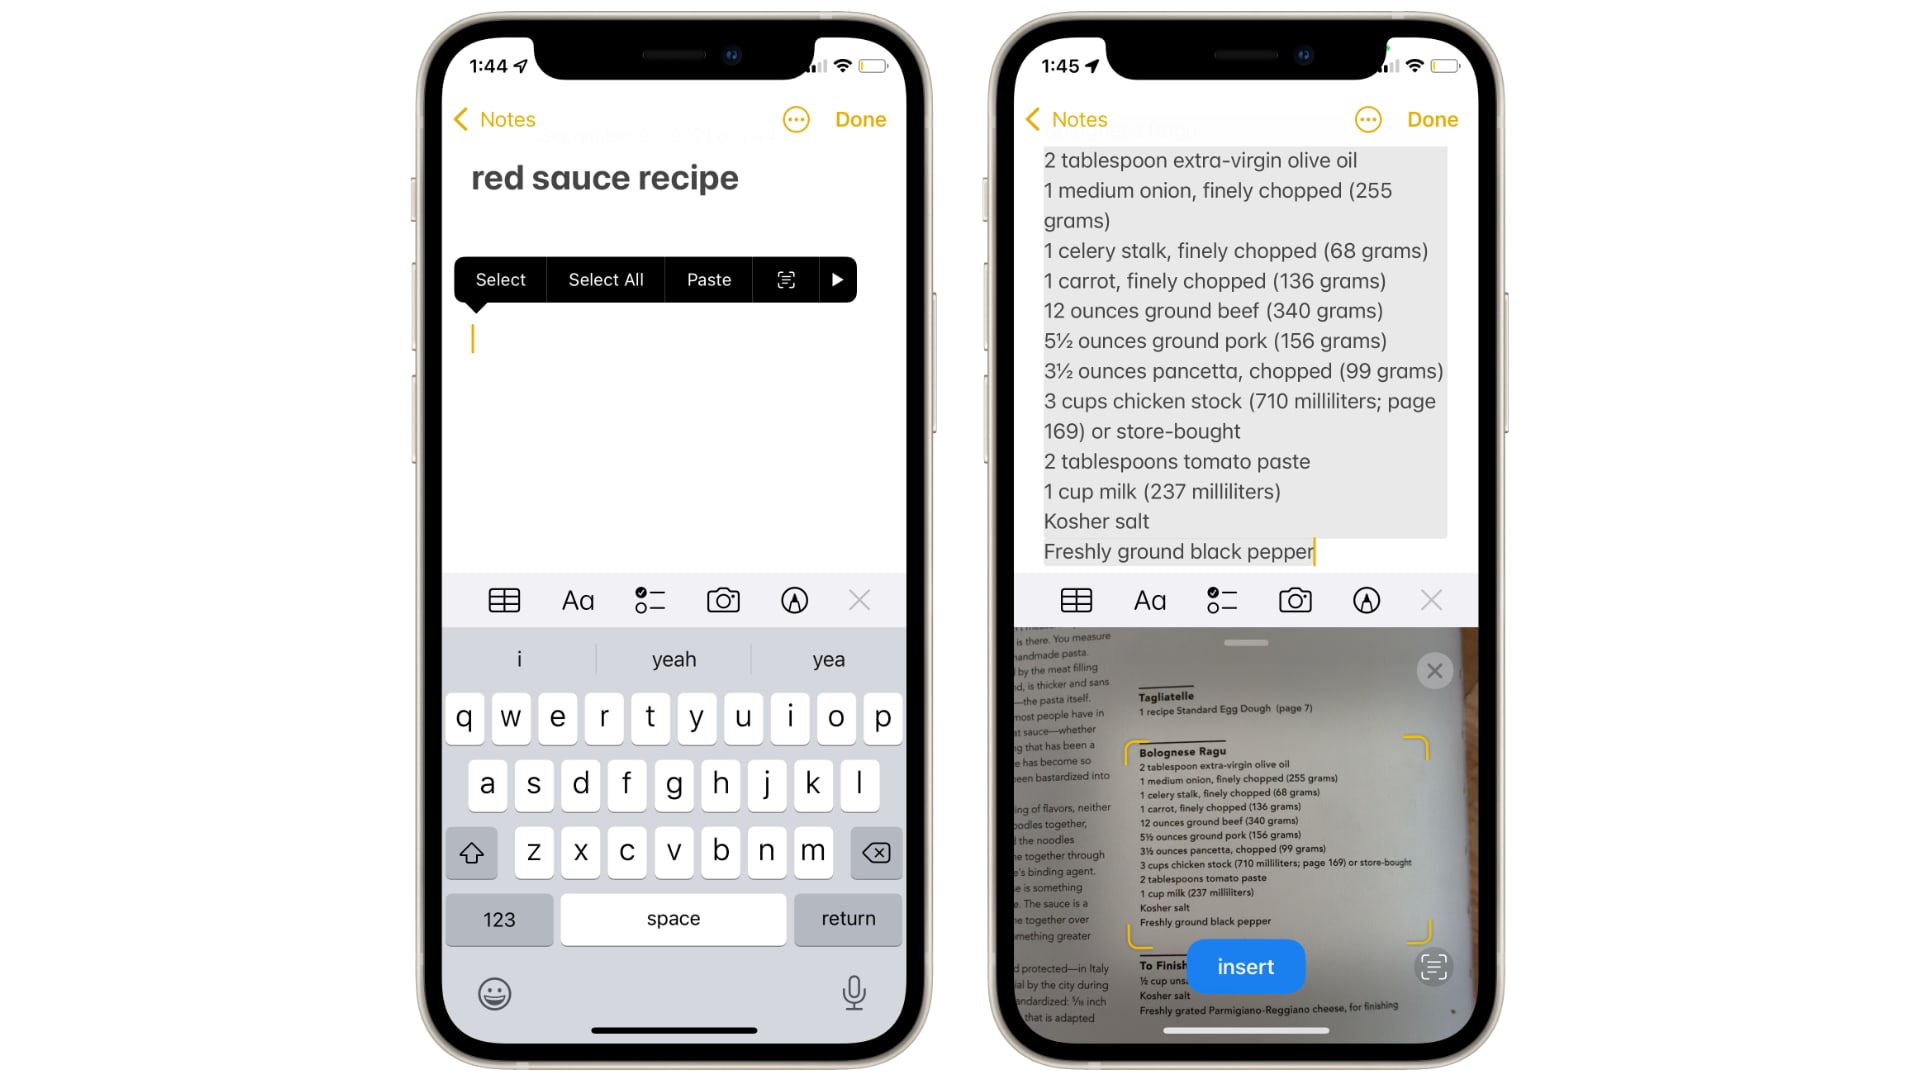 text-copying-techniques-a-guide-for-iphone-10